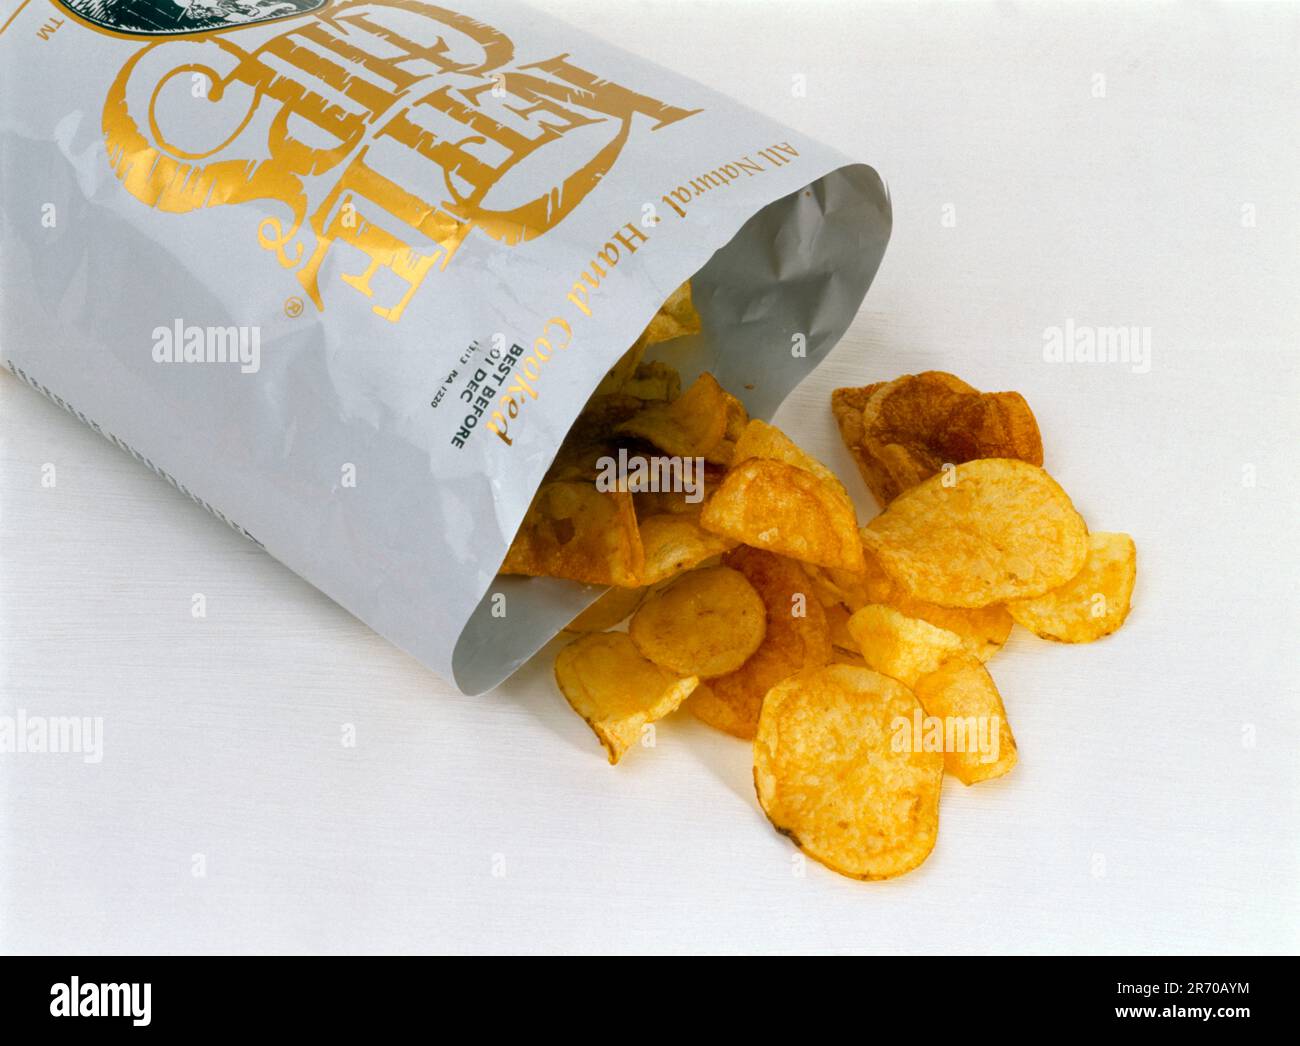 Close up of a Packet of Ready Salted Kettle Chips (Crisps) Stock Photo